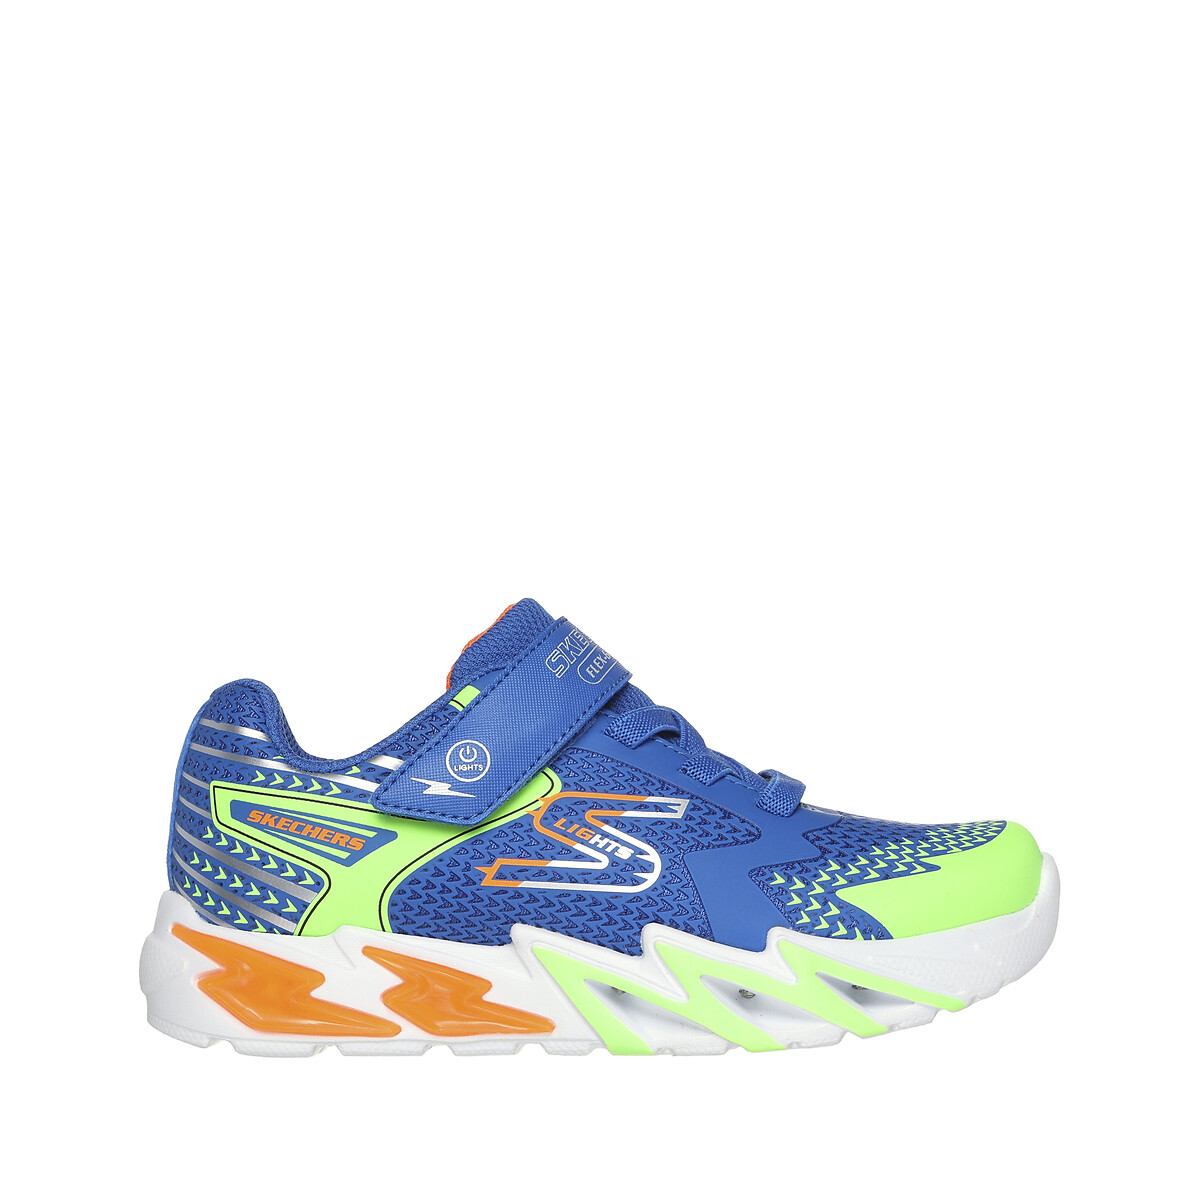 Image of Kids Flex-Glow Bolt Trainers with Touch 'n' Close Fastening